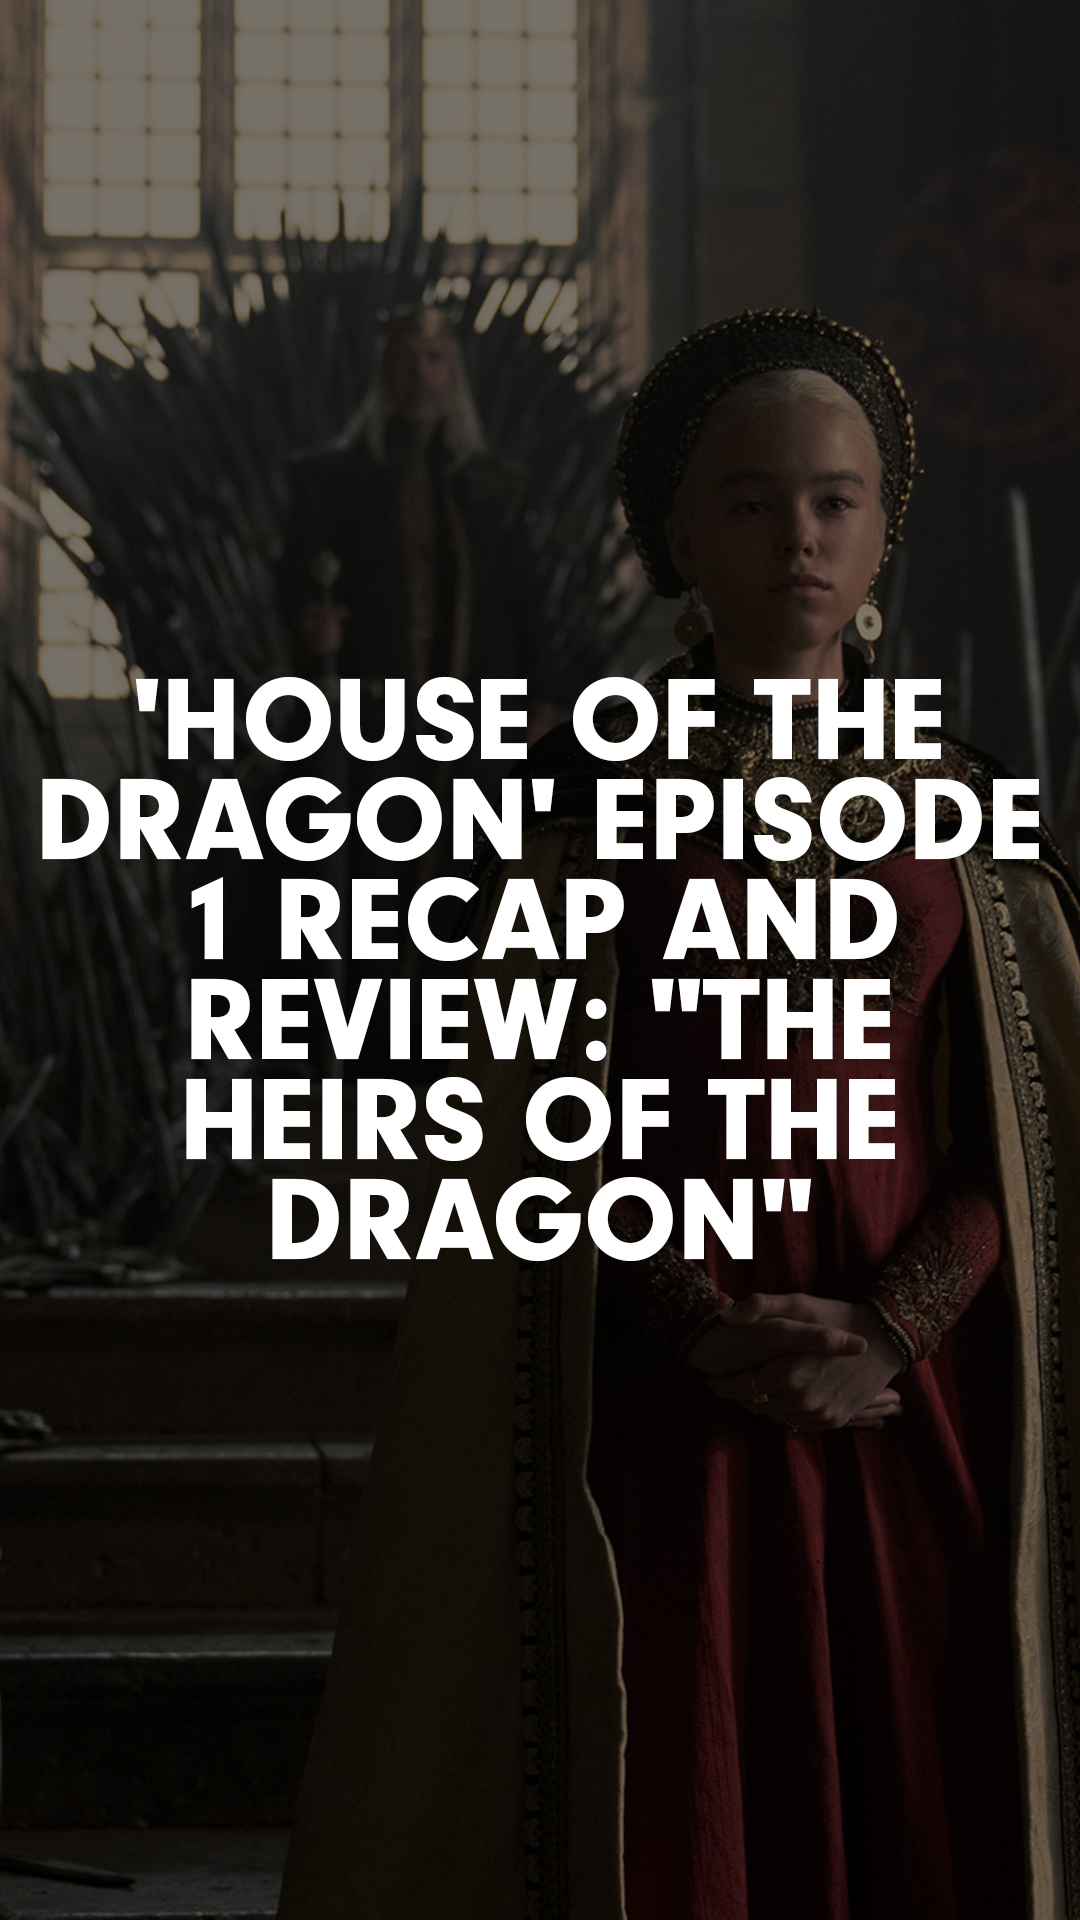 Still Watching House of the Dragon Episode 1: “Heirs of the Dragon”